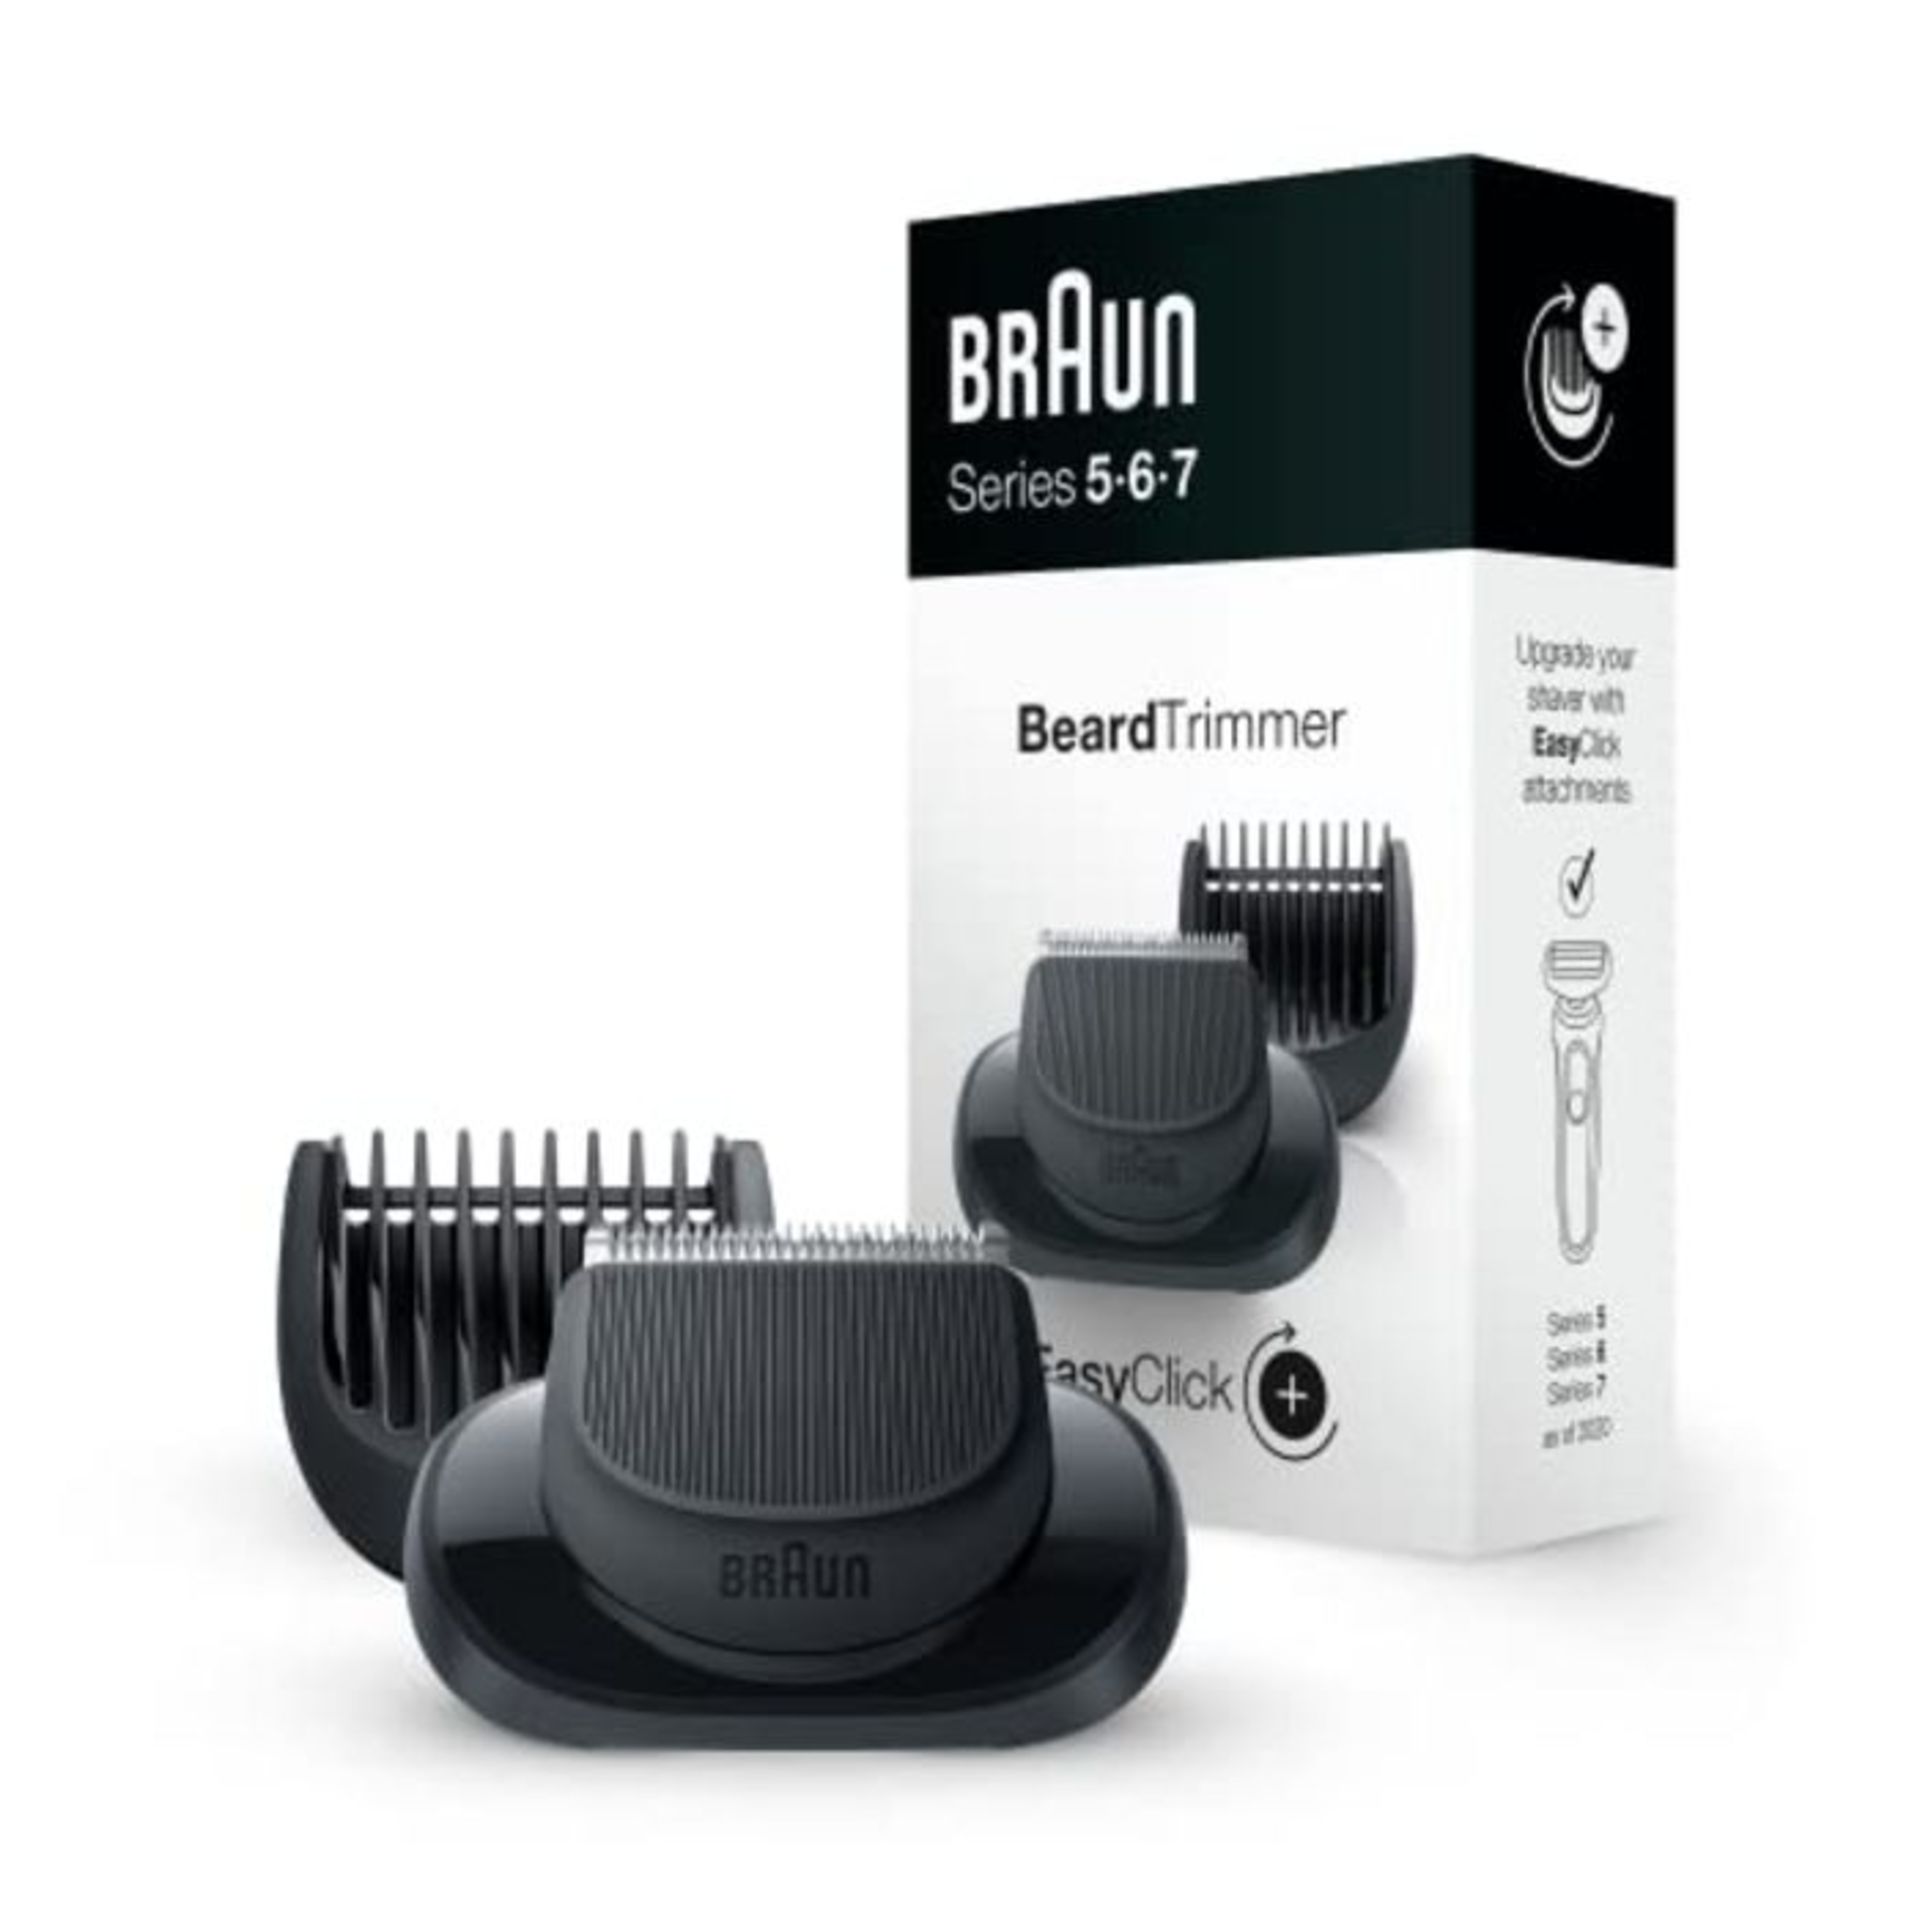 Braun EasyClick Beard Trimmer Attachment For New Generation Series 5, 6 and 7 Electric